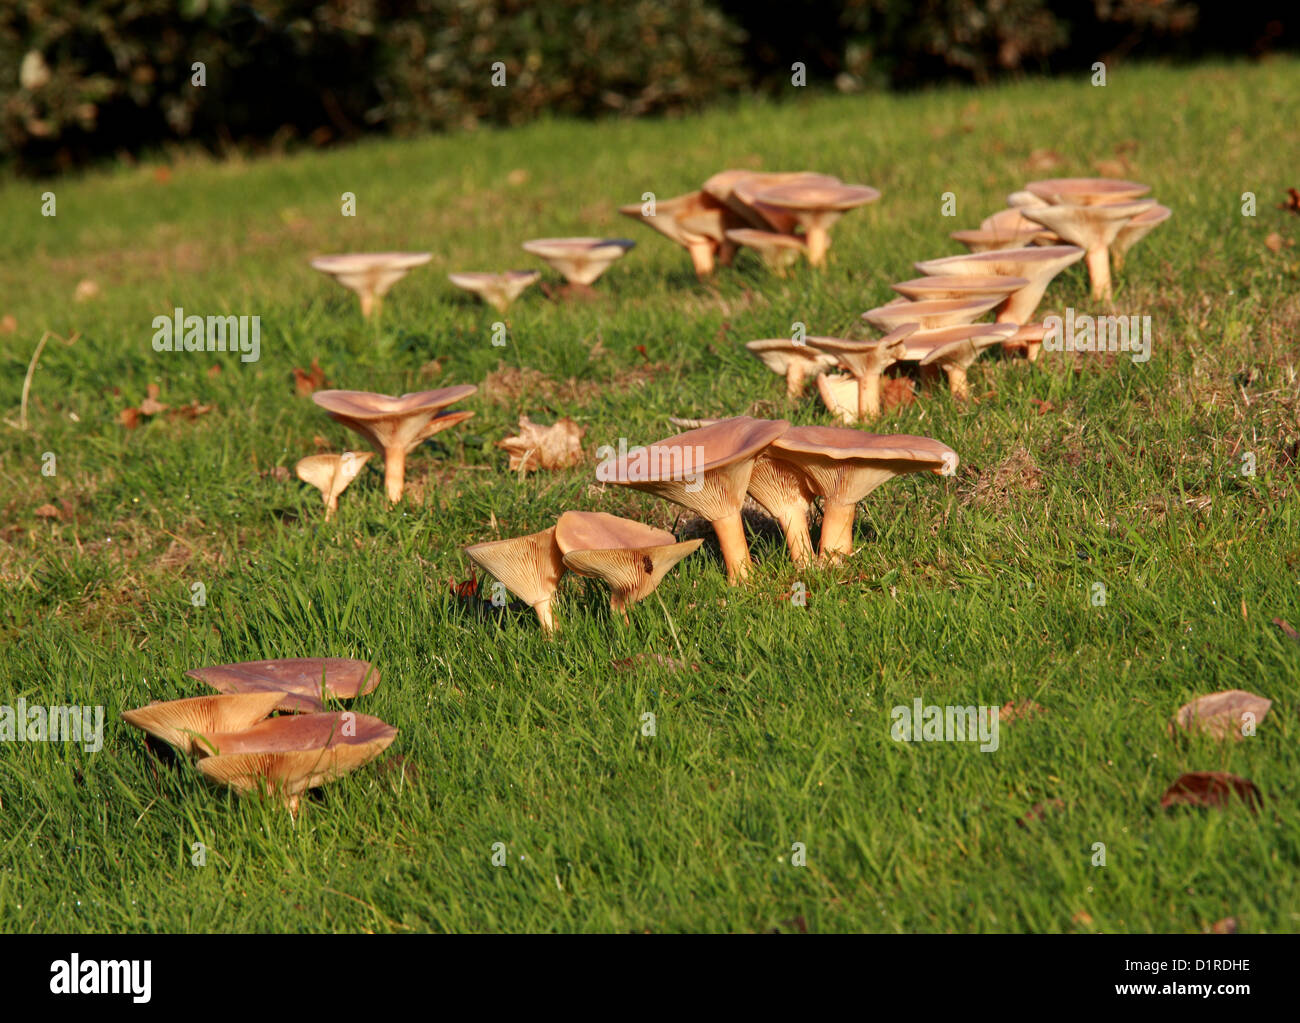 Common Funnel Fungus, Clitocybe gibba, Tricholomataceae. Part of a Large Ring Growing on a Grass Lawn. Stock Photo